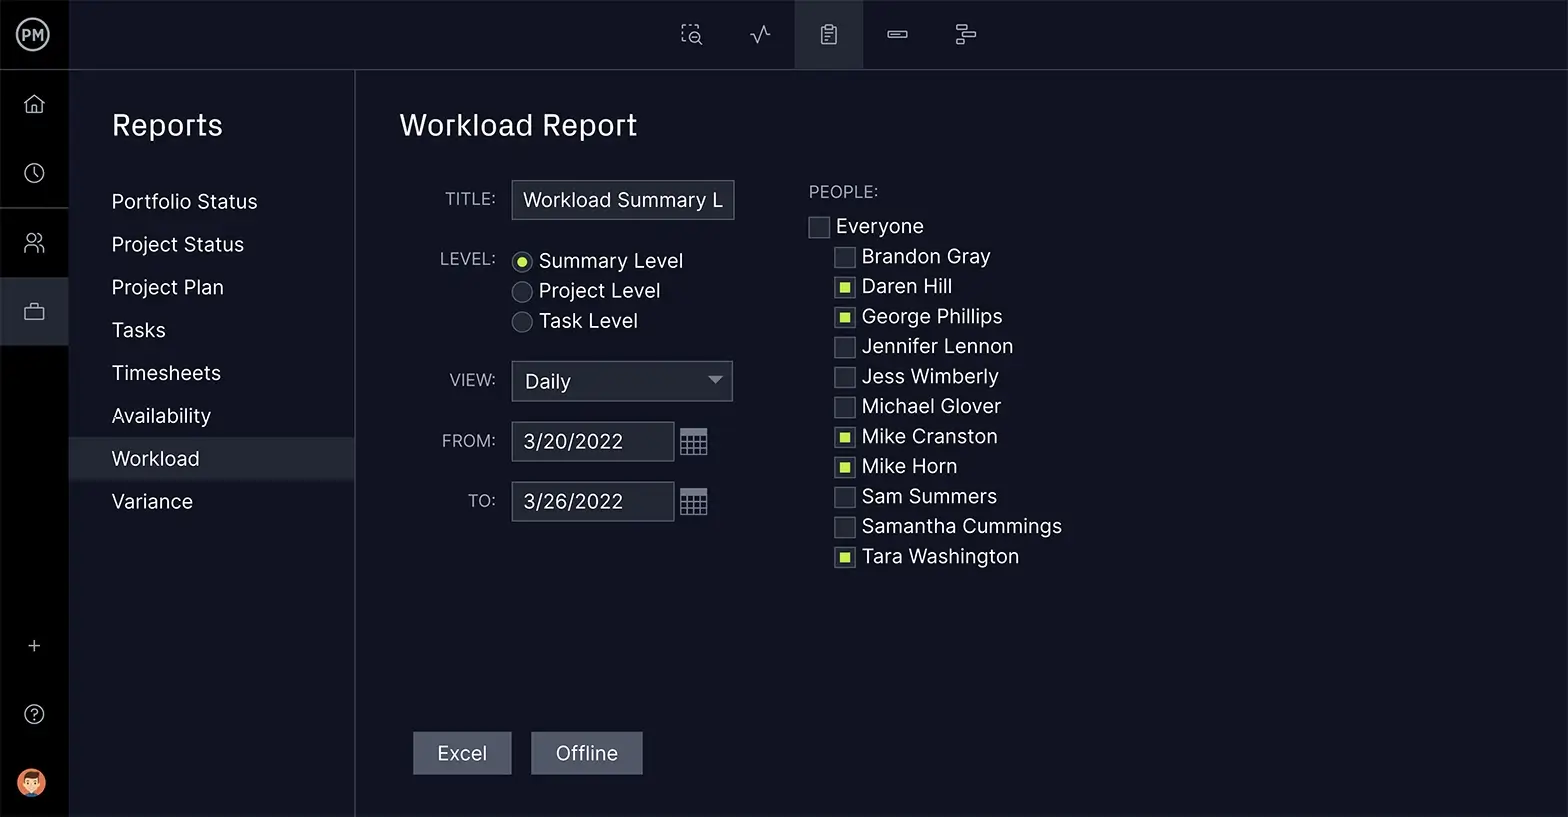 ProjectManager's workload report filter